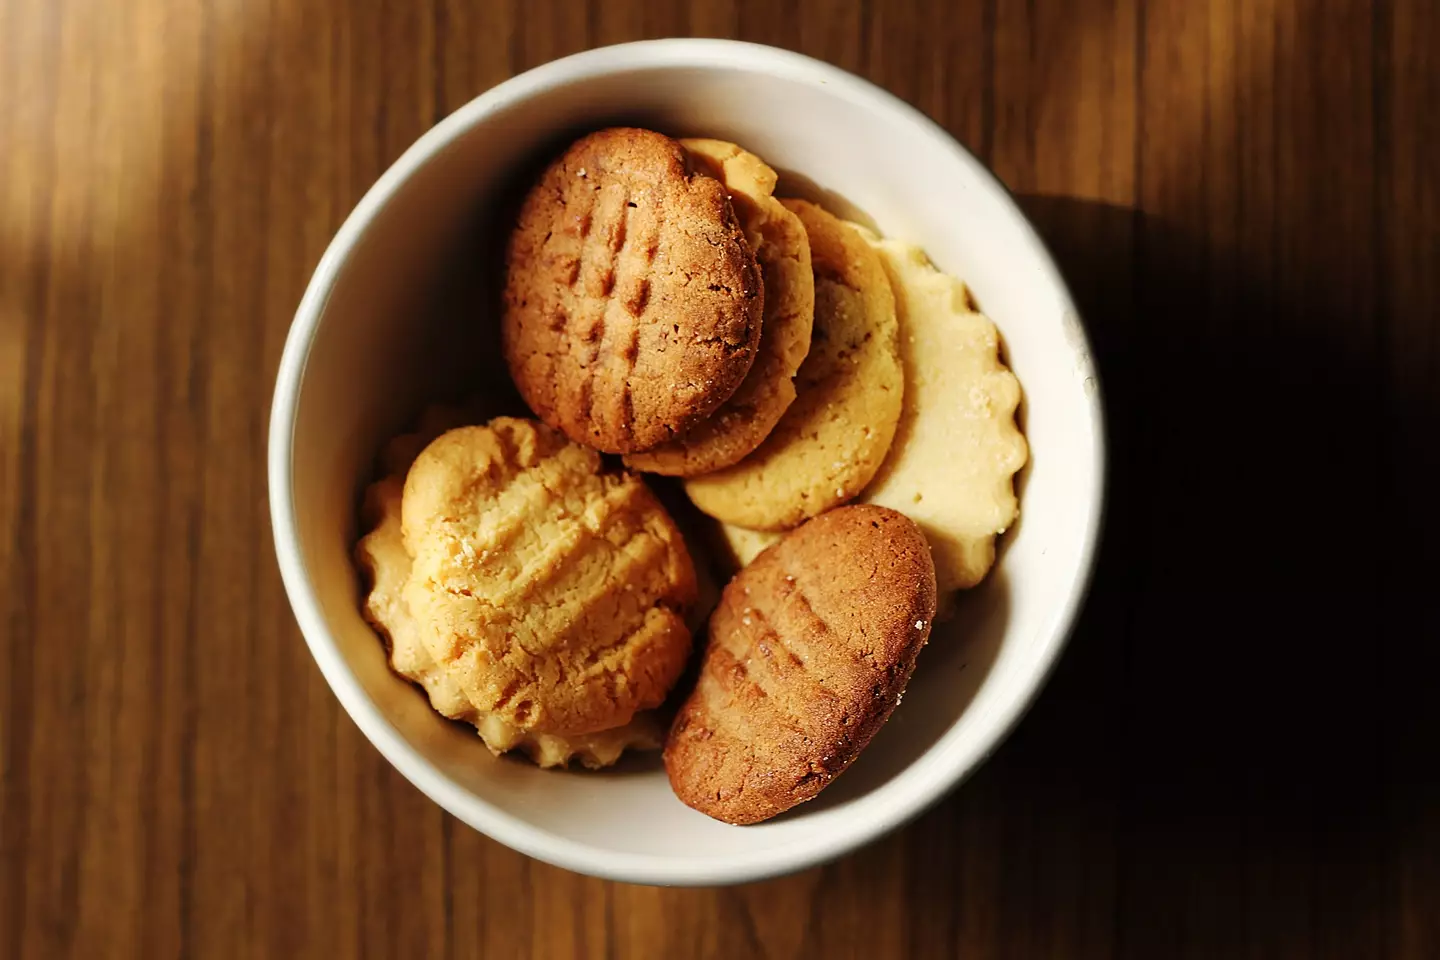 Many people associate biscuits with being sweet but there are many savoury varieties too.